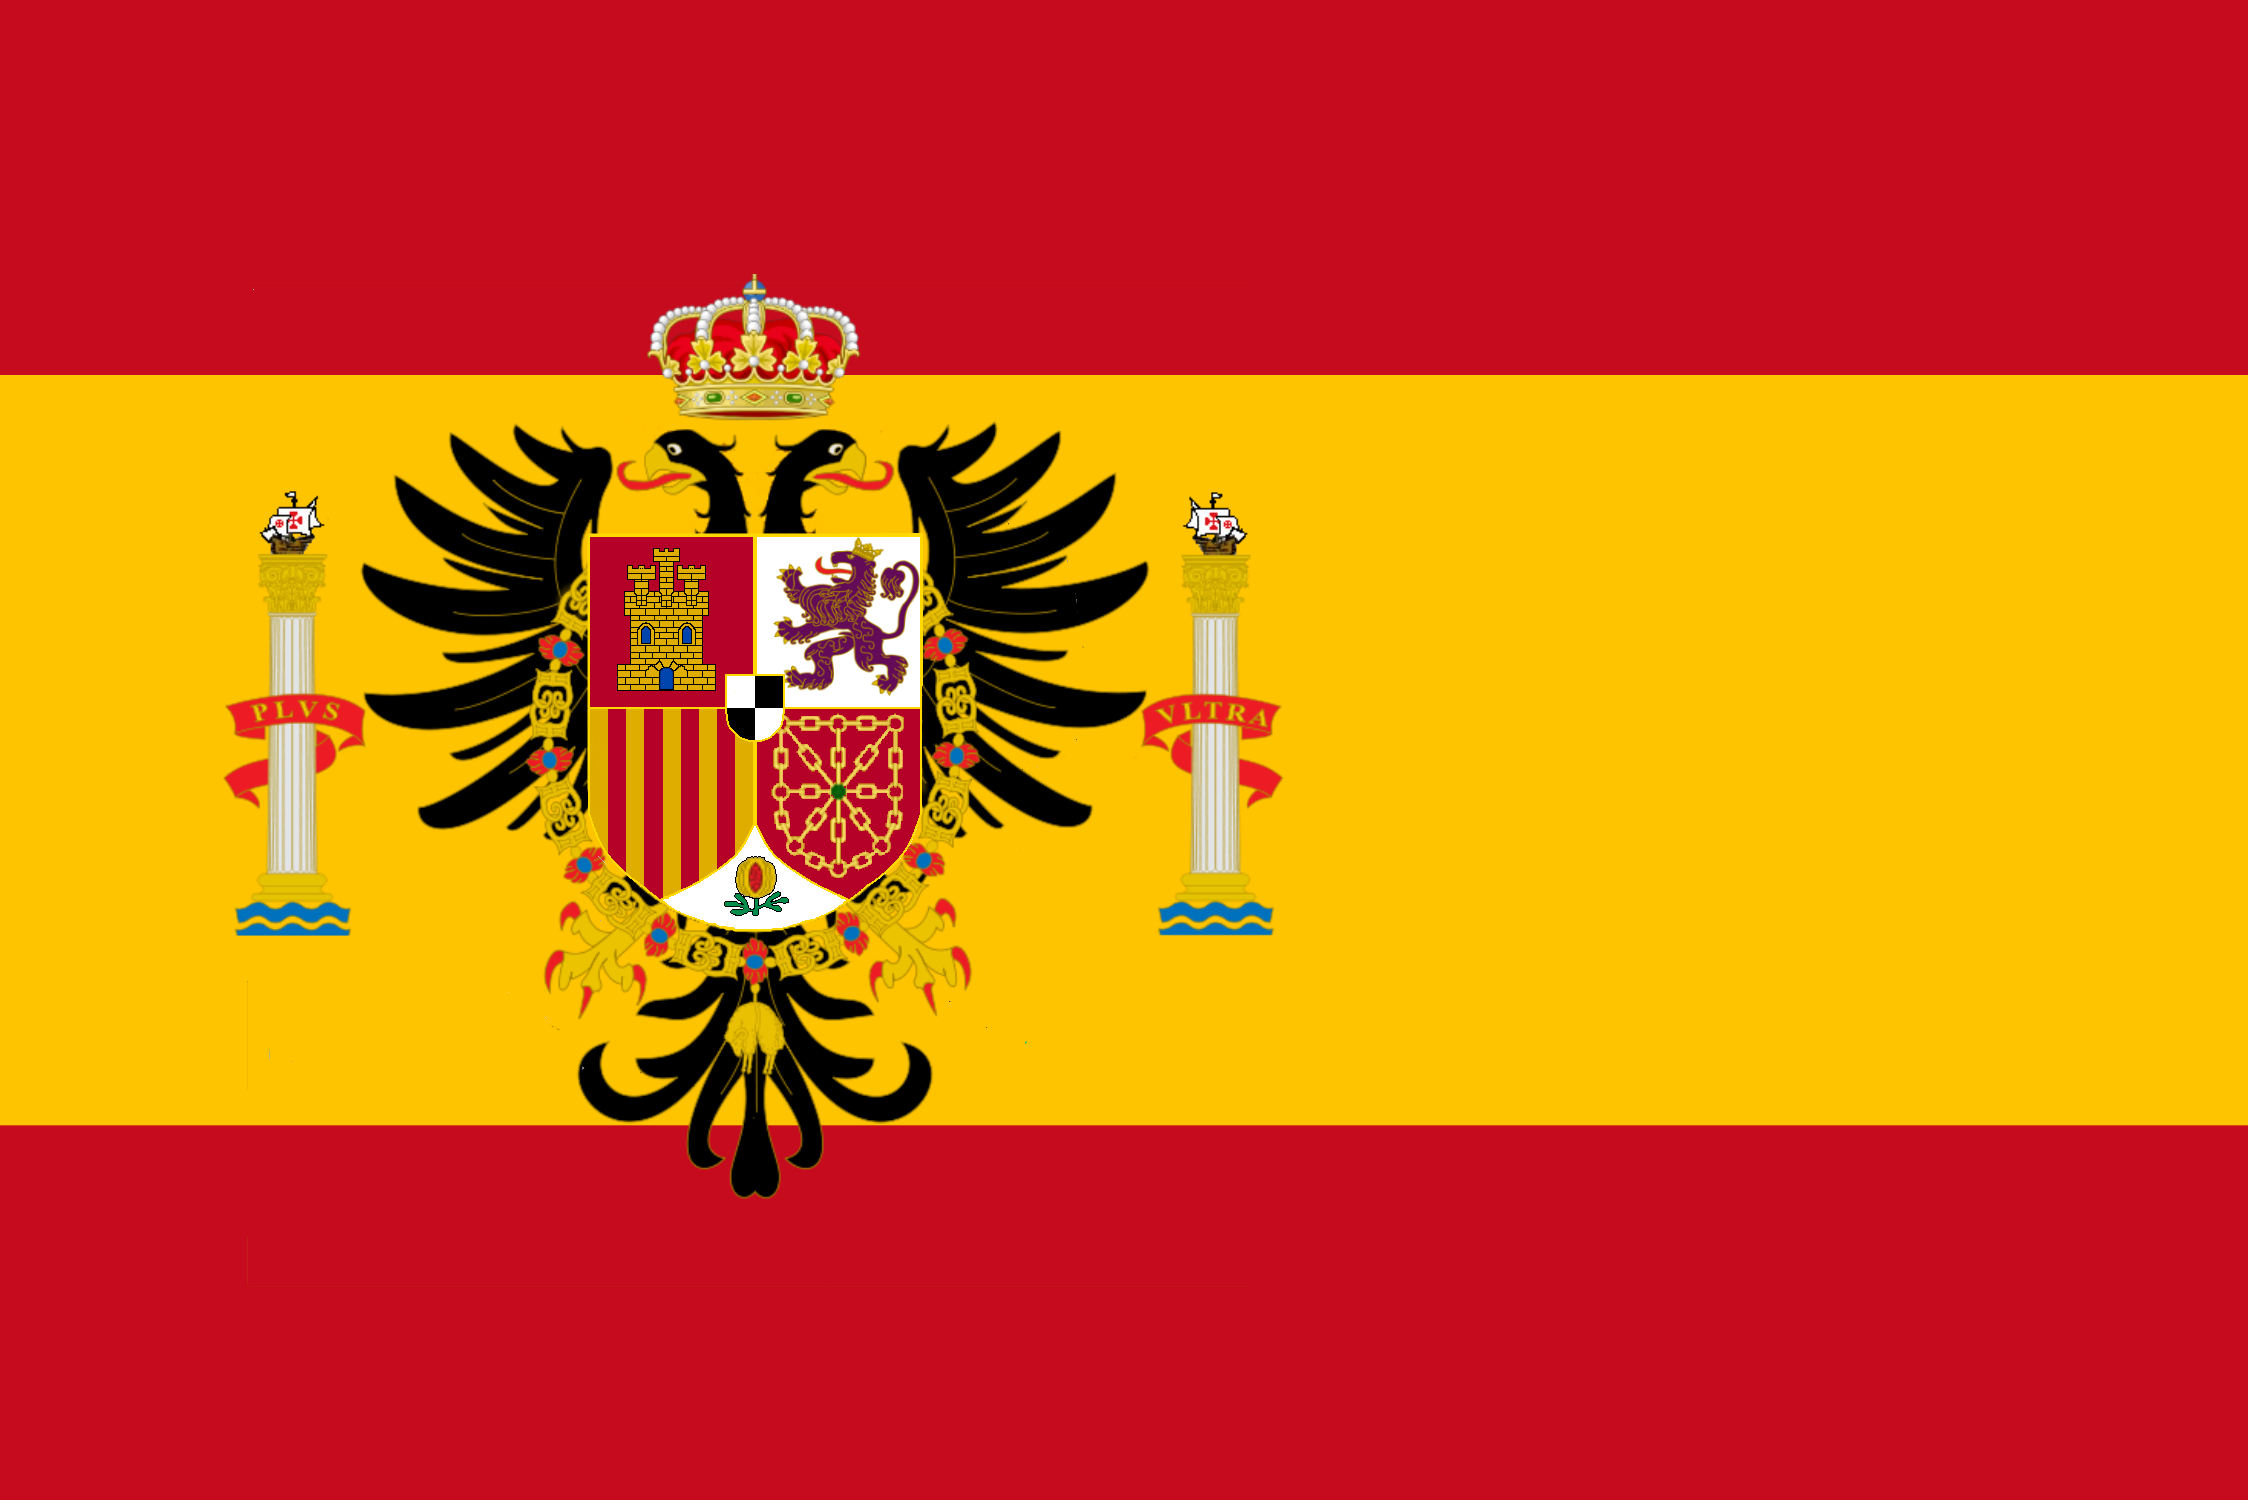 http://img4.wikia.nocookie.net/__cb20121209115246/althistory/images/3/39/Spain_Flag_La_Gloriosa.png